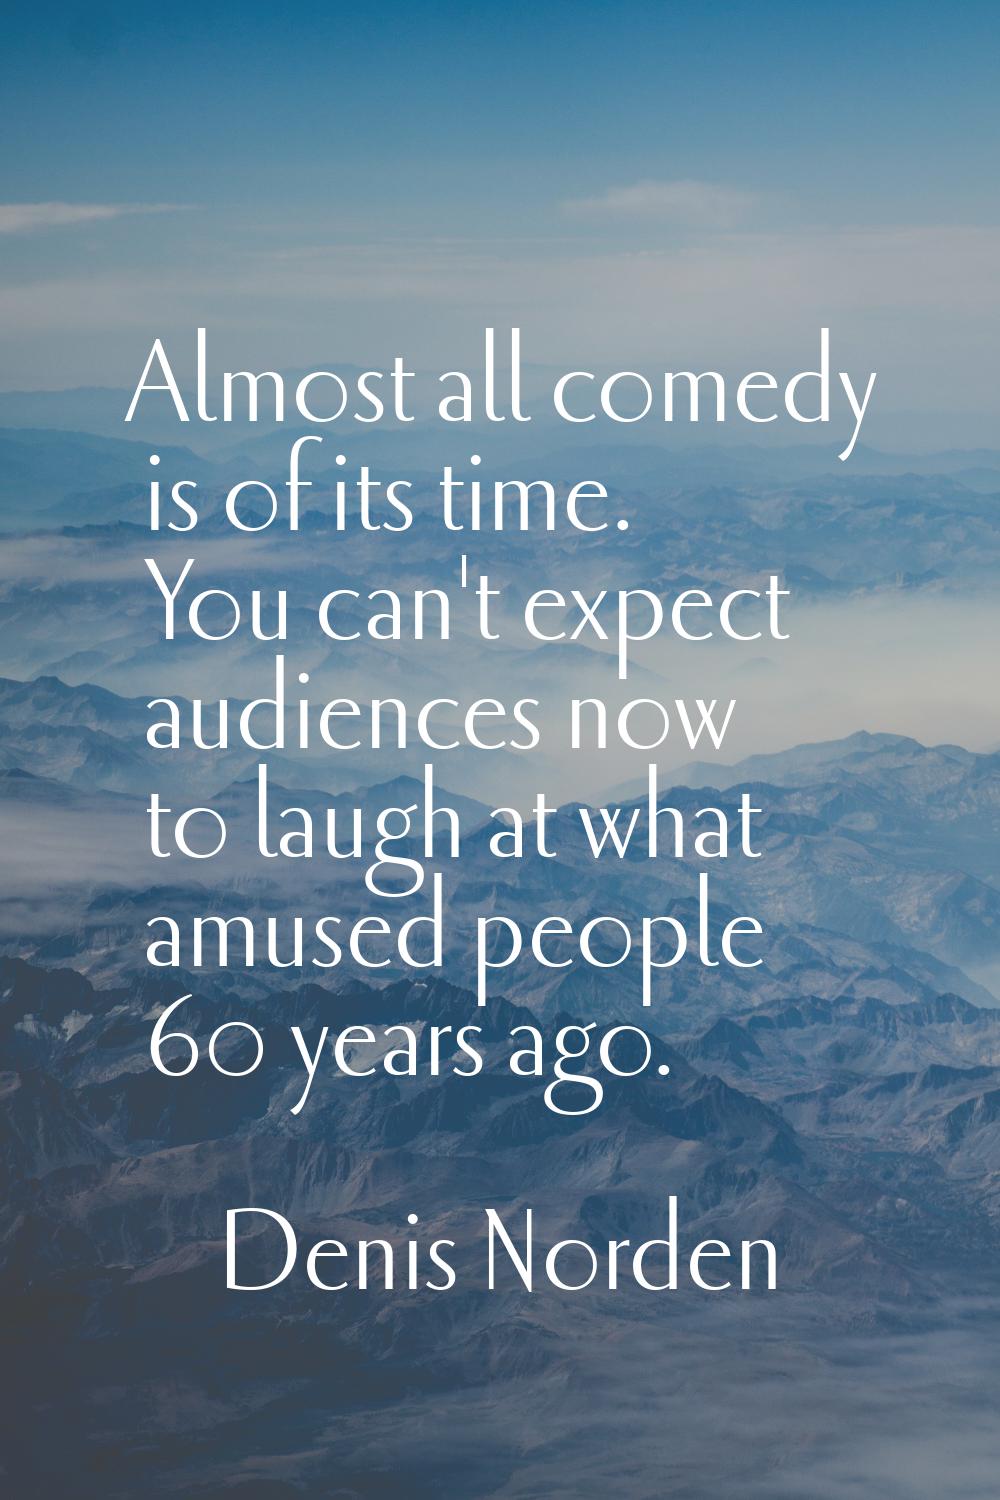 Almost all comedy is of its time. You can't expect audiences now to laugh at what amused people 60 